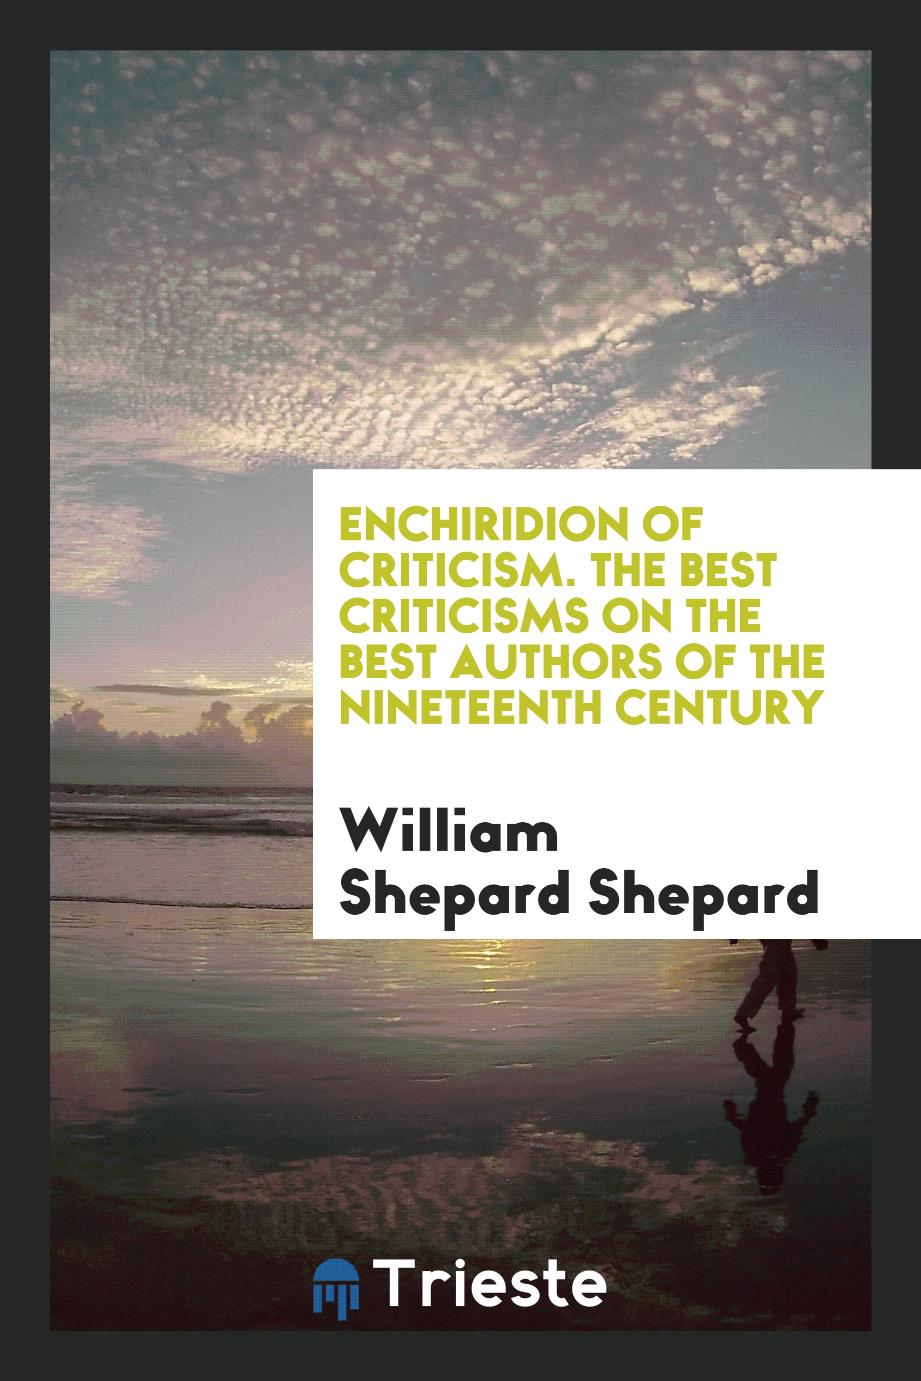 Enchiridion of criticism. The best criticisms on the best authors of the nineteenth century